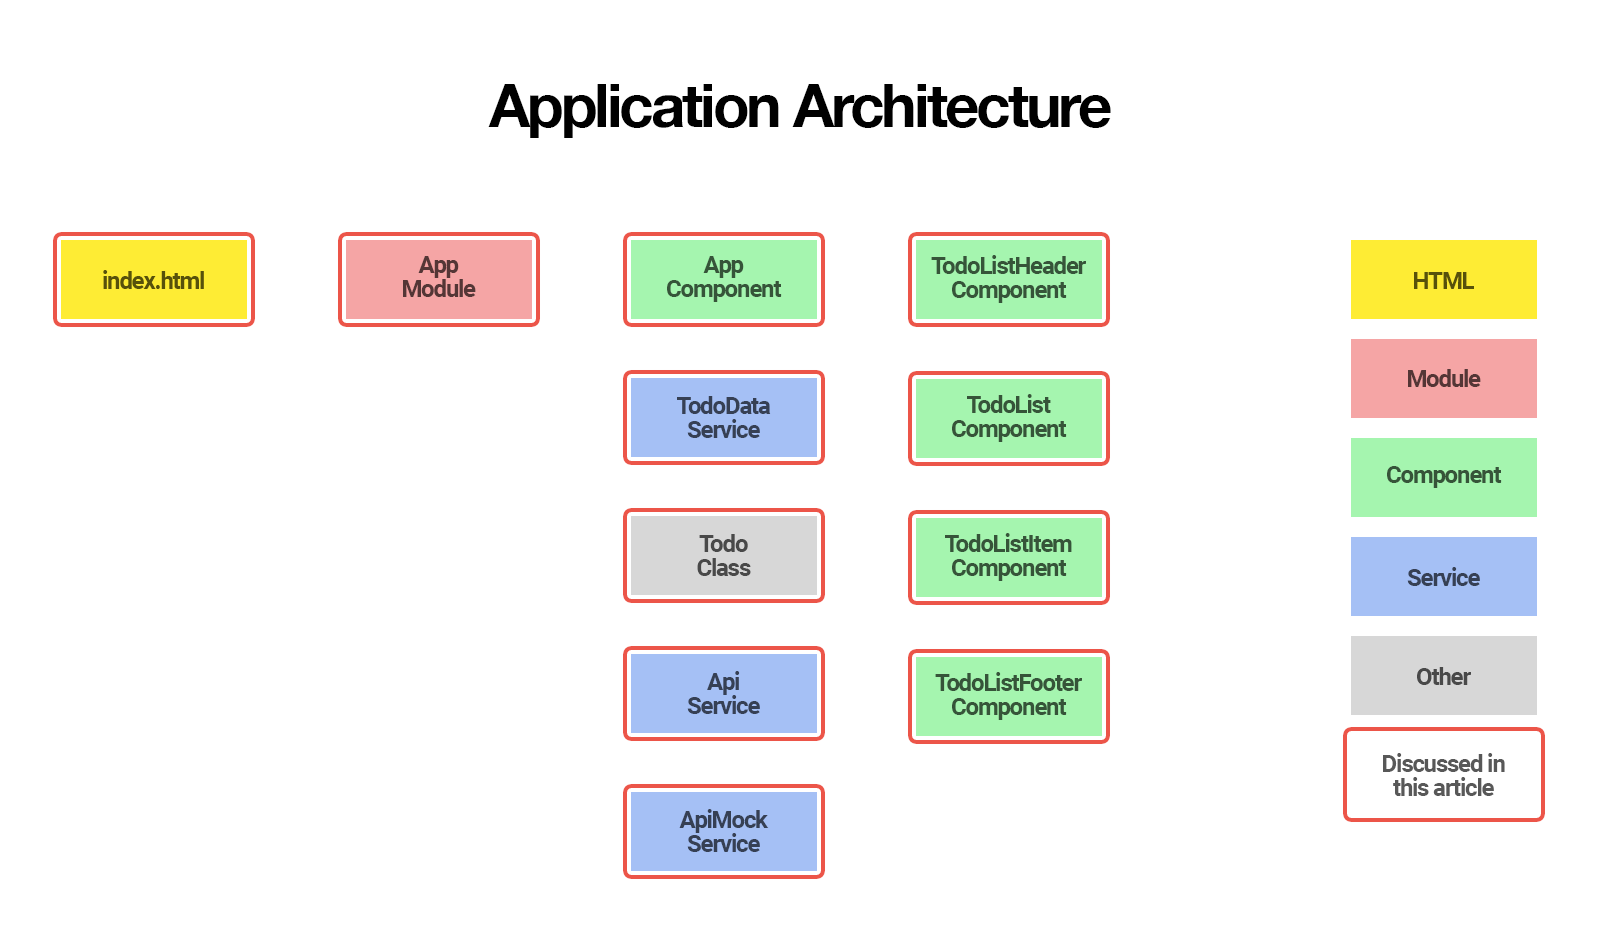 Angular router: Application Architecture